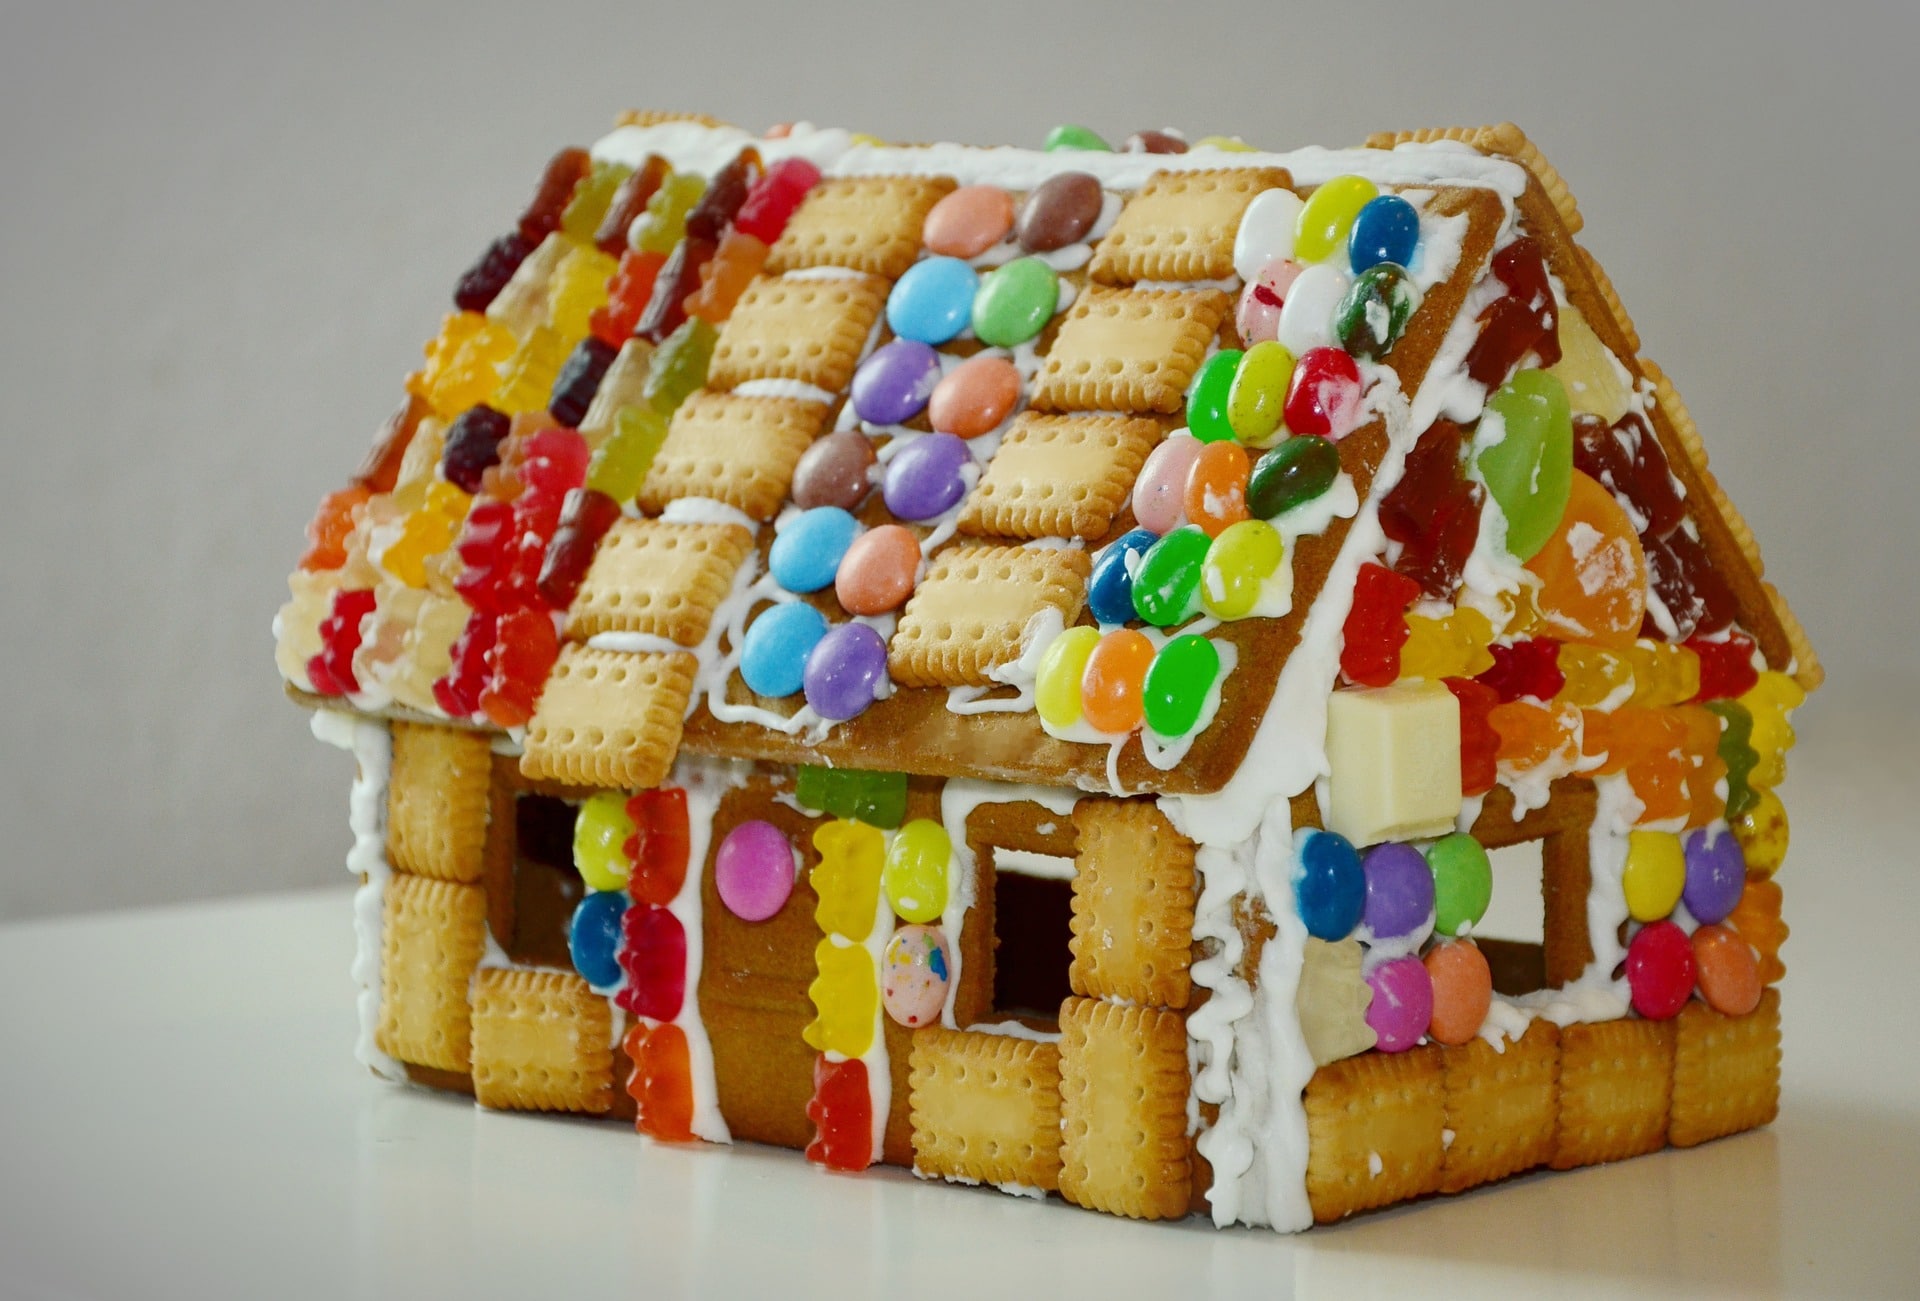 gingerbread-house-1098731_1920